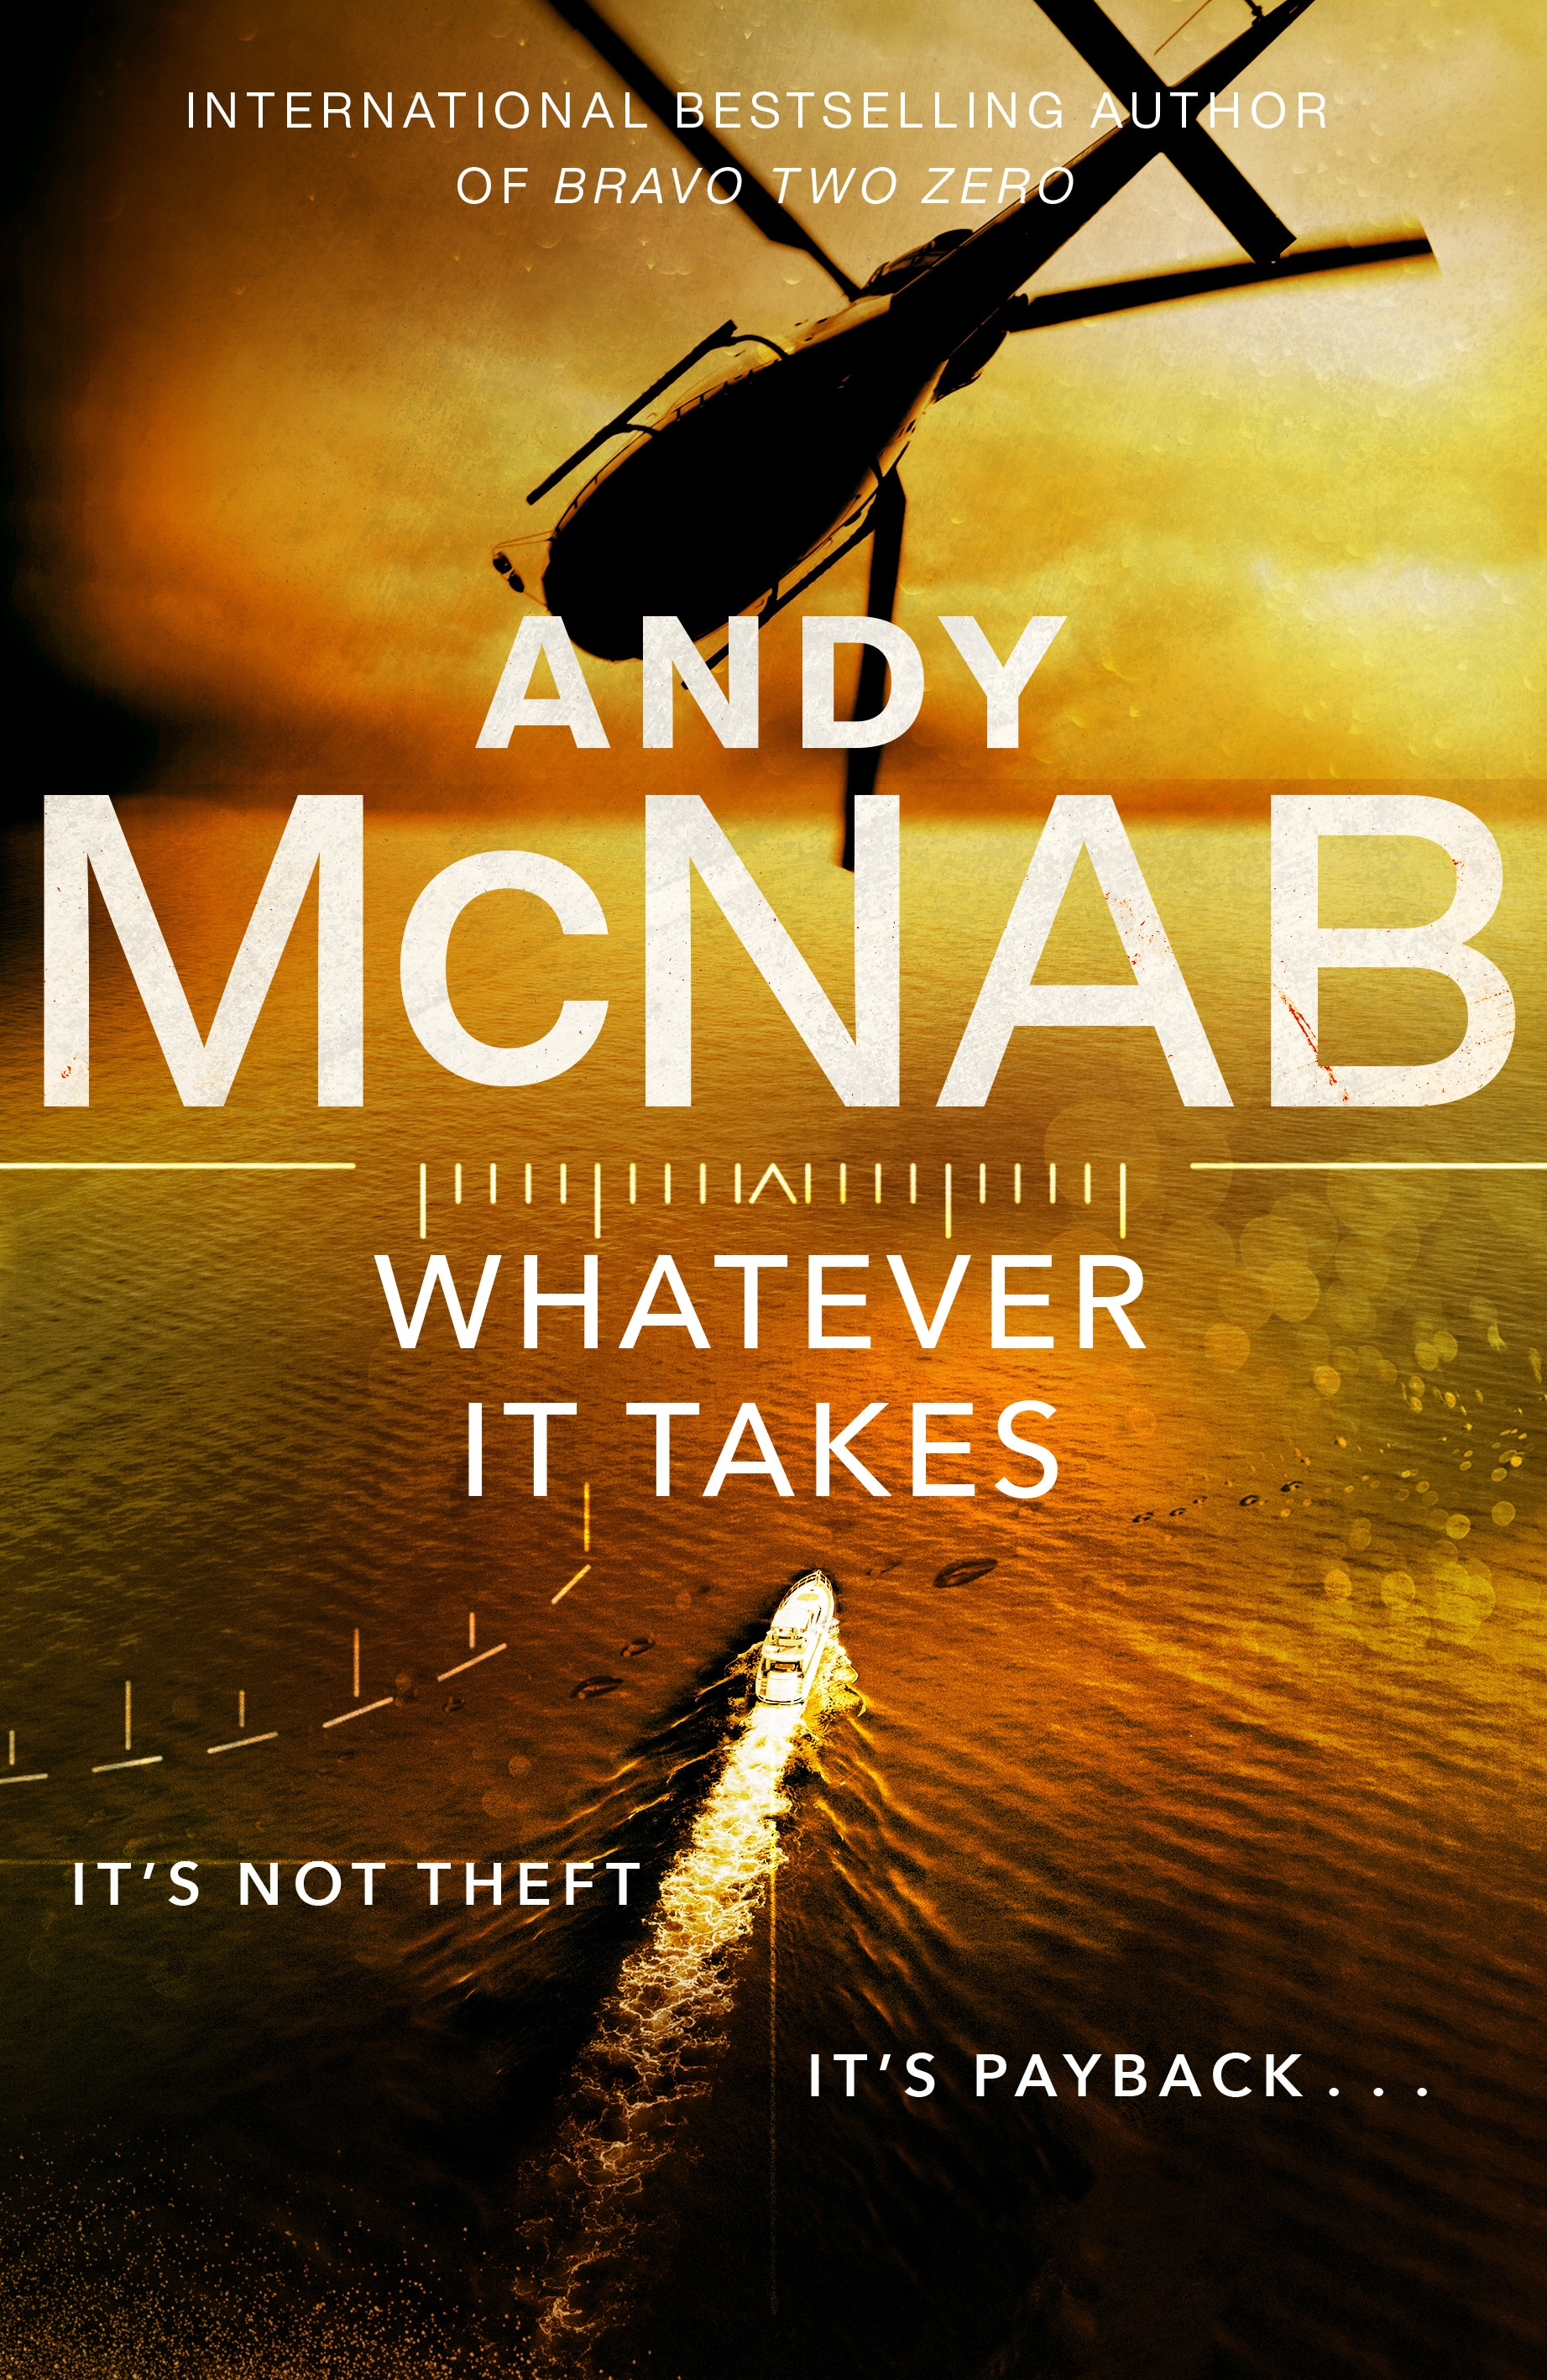 Book “Whatever It Takes” by Andy McNab — October 17, 2019